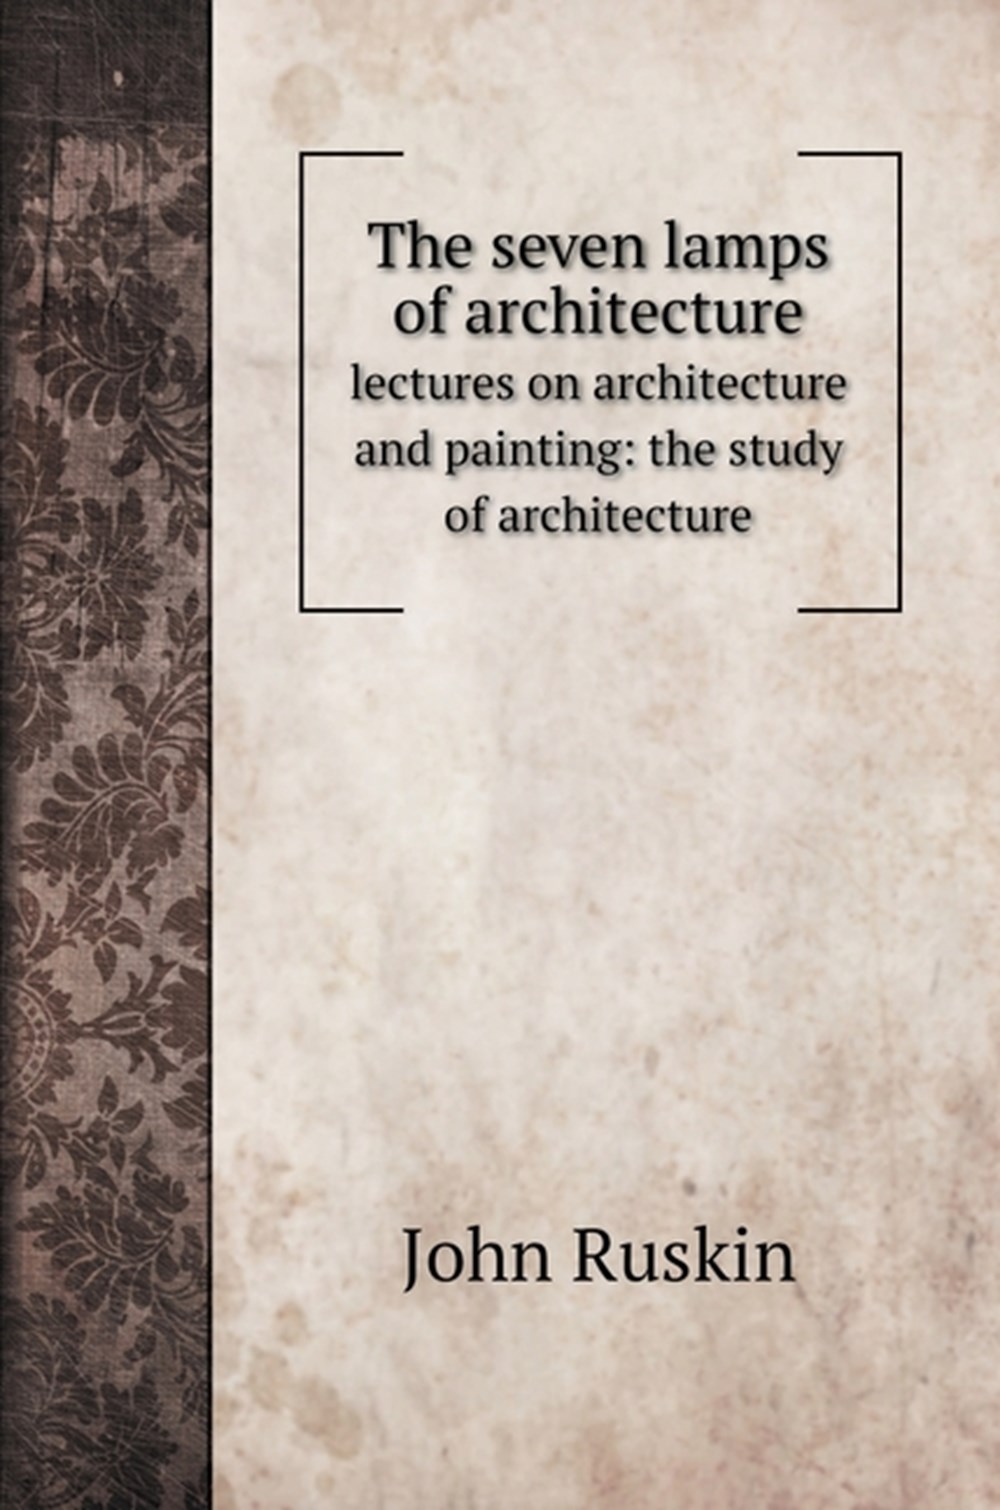 seven lamps of architecture: lectures on architecture and painting: the study of architecture